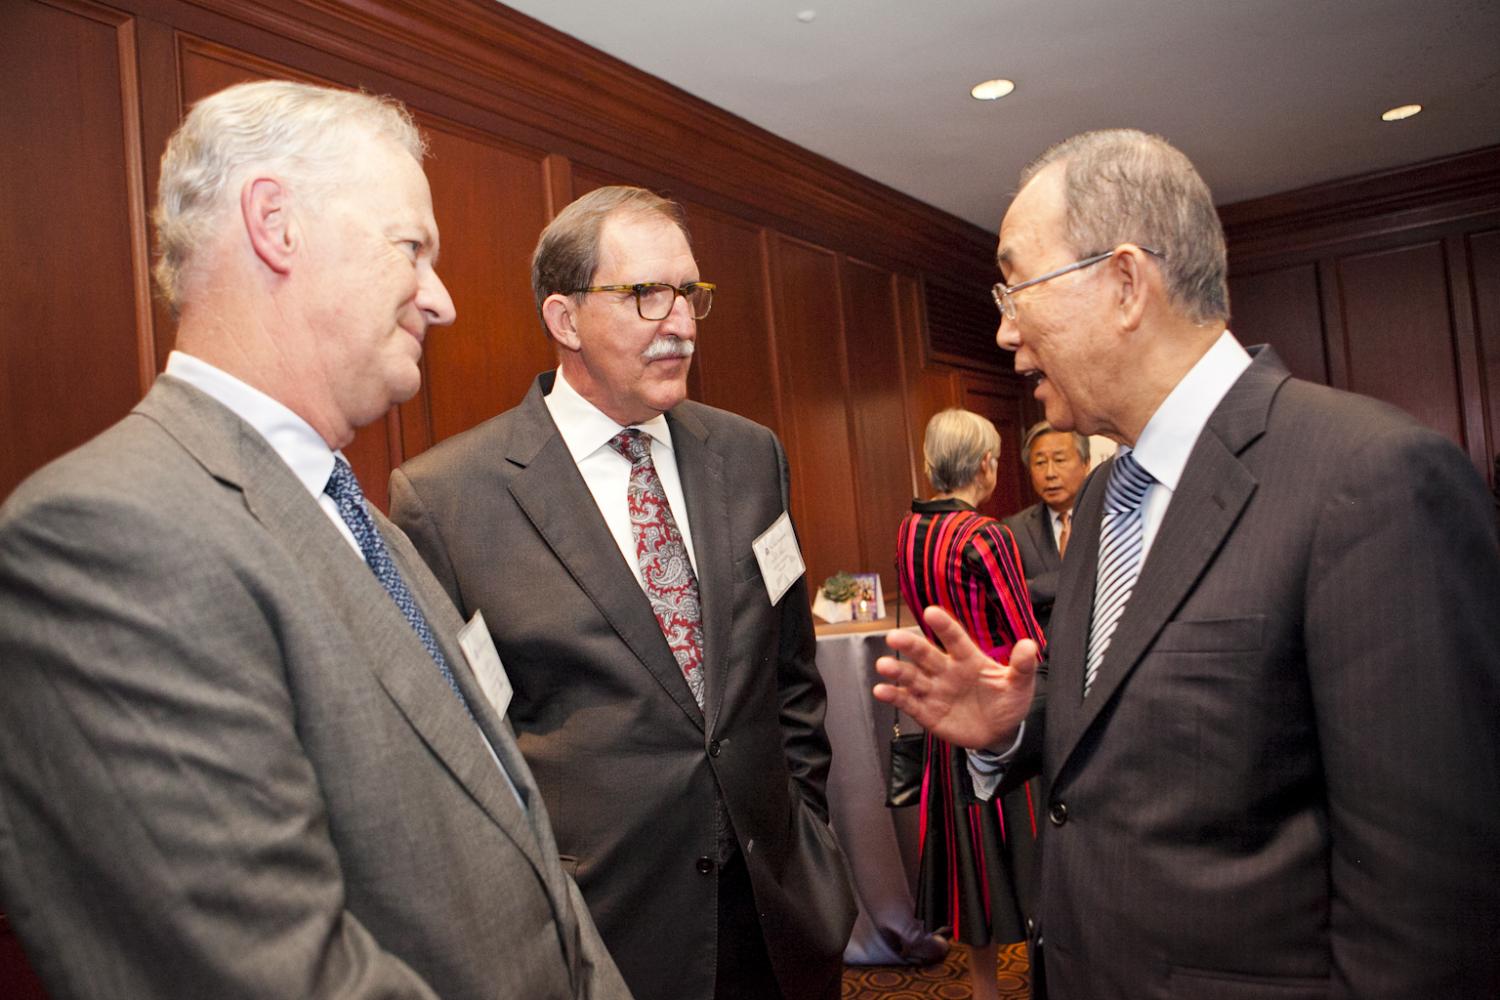 Asia Foundation Trustee Jim McCool, President David D. Arnold, and Ban Ki-moon in discussion